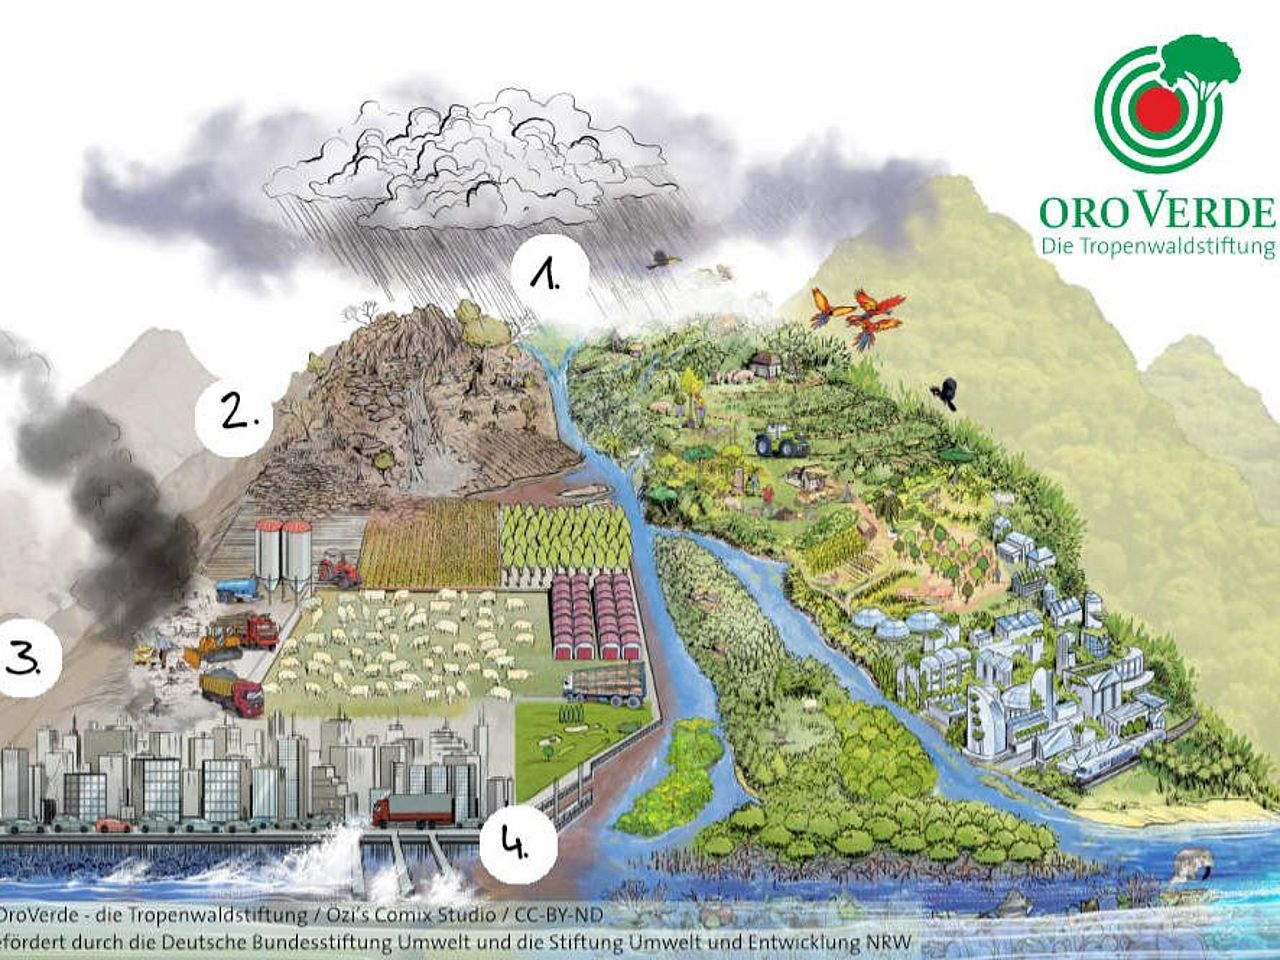 Ecosystem-based adaptations explained in a simple way in an appealing graphic and illustration. The many small adaptations to climate change lead to a livable future vision, where ecosystem services are preserved.